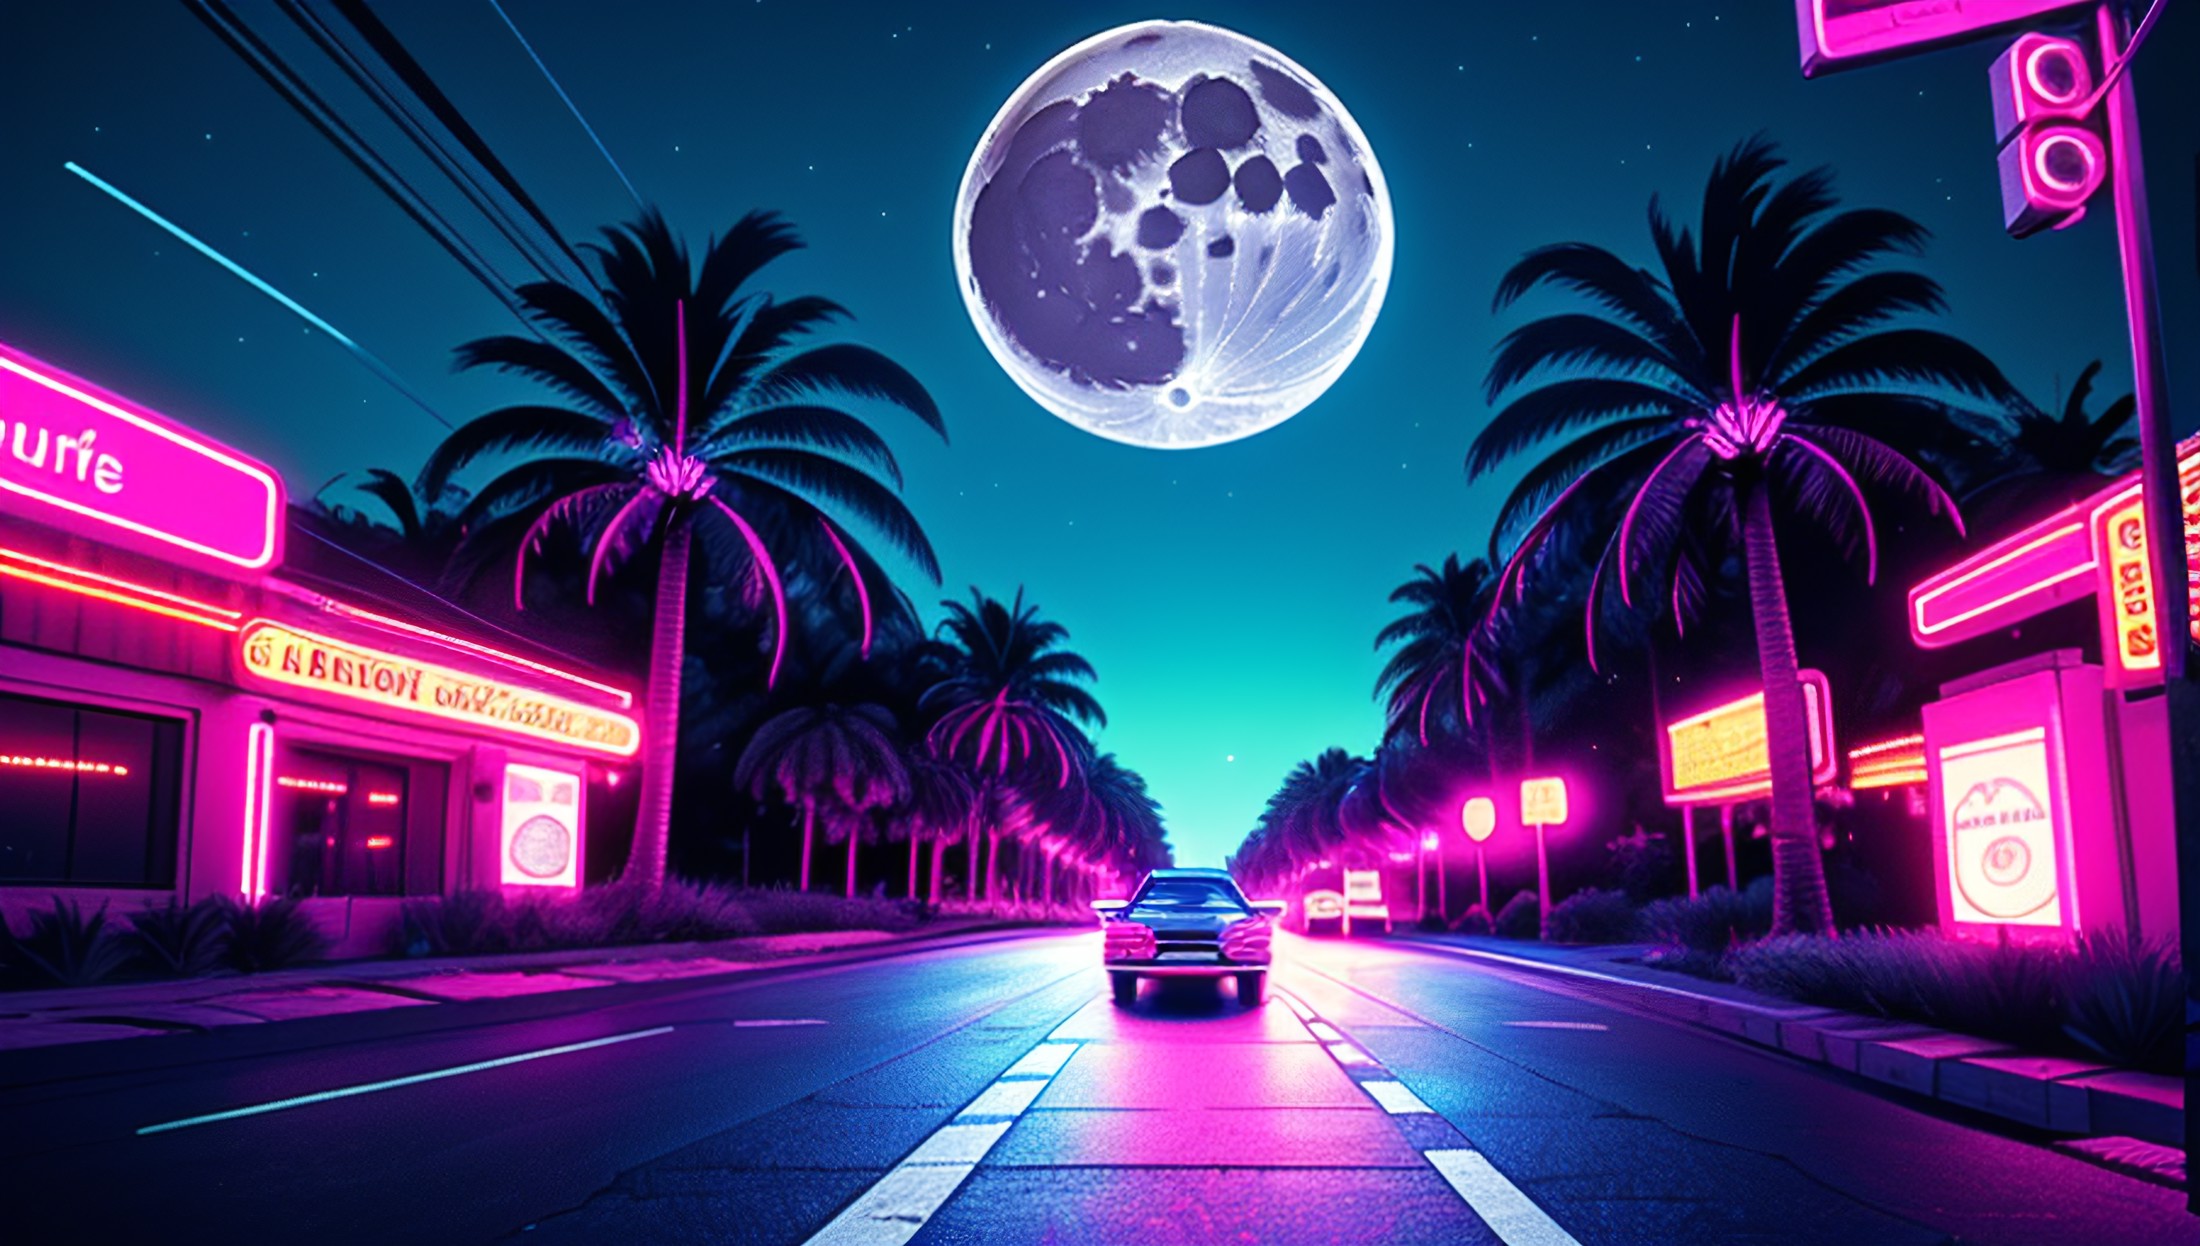 (retrowave), (road), (car), (enormous moon), (palm trees on the side of the road), (pink and blue color scheme), (purple n...